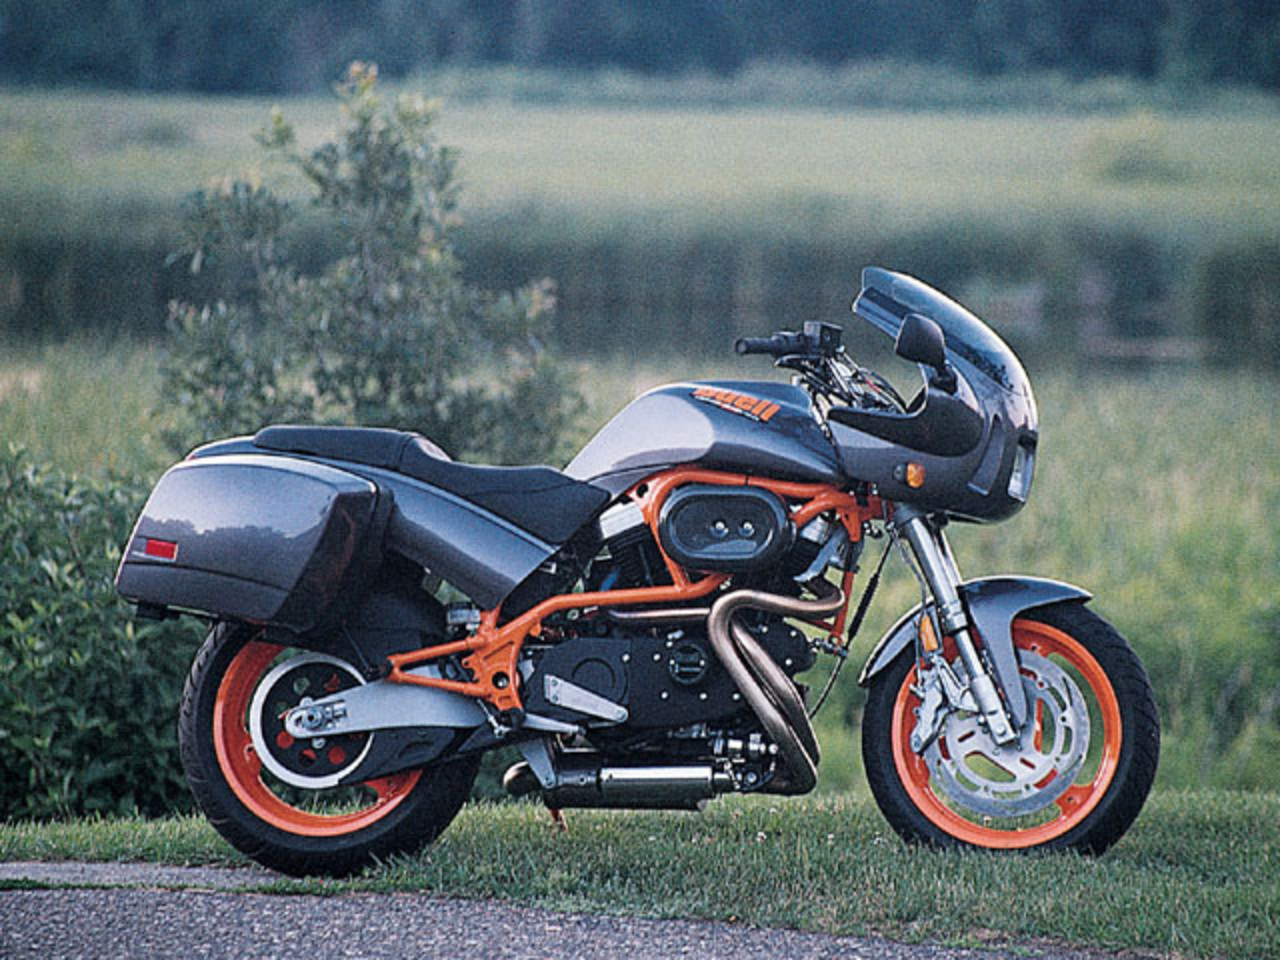 Buell s3. Best photos and information of model.